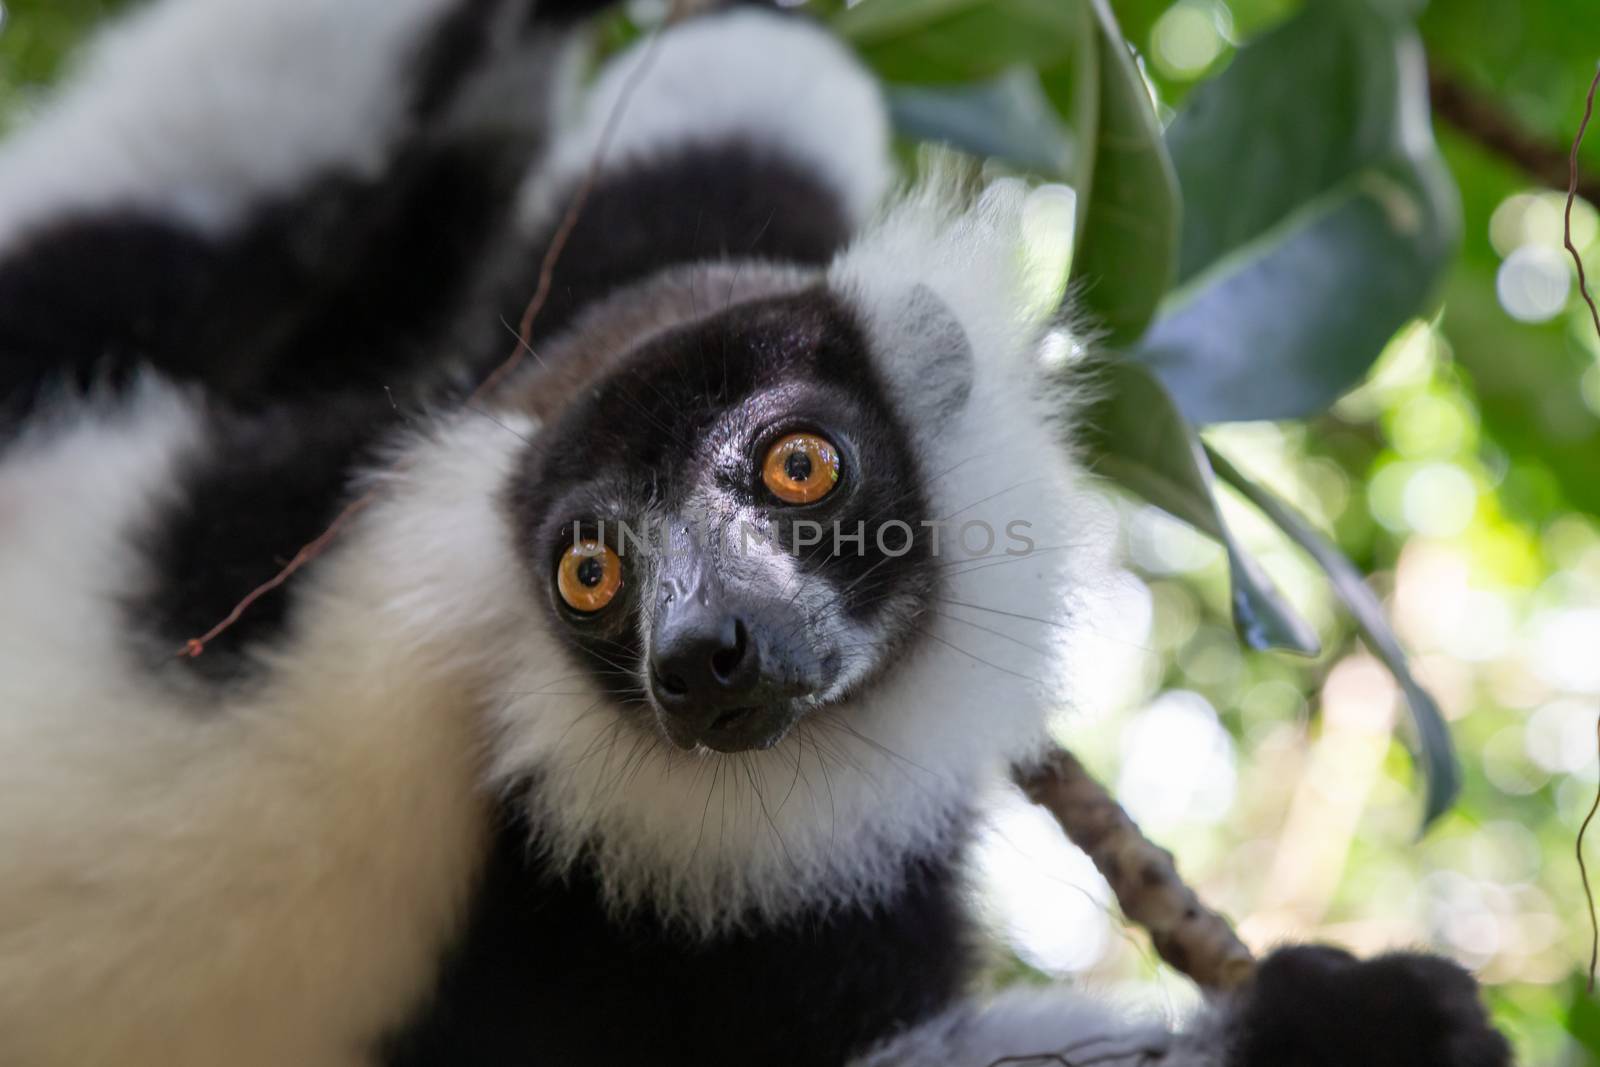 A portrait of a black and white Vari Lemur by 25ehaag6